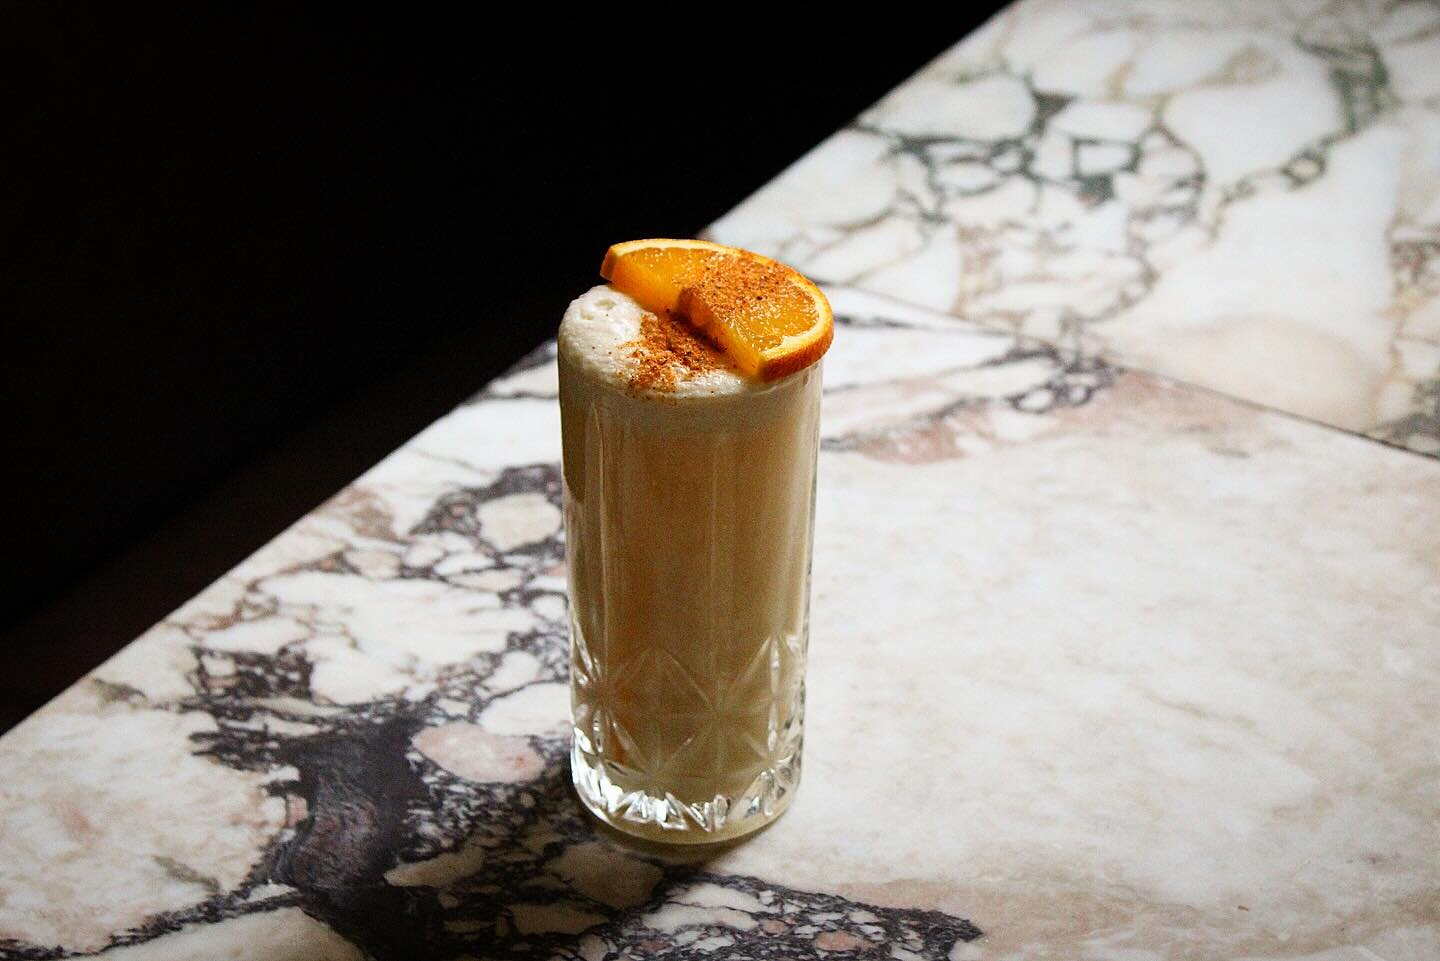 30 degrees in March is a bit of&hellip; Weird Science. 
Poured with @elijahcraig bourbon, banana liqueur, coconut, lime, orange, and pineapple. Topped off with club soda (egg cream style) and then dusted with elote seasoning. 
Pairs perfectly with th